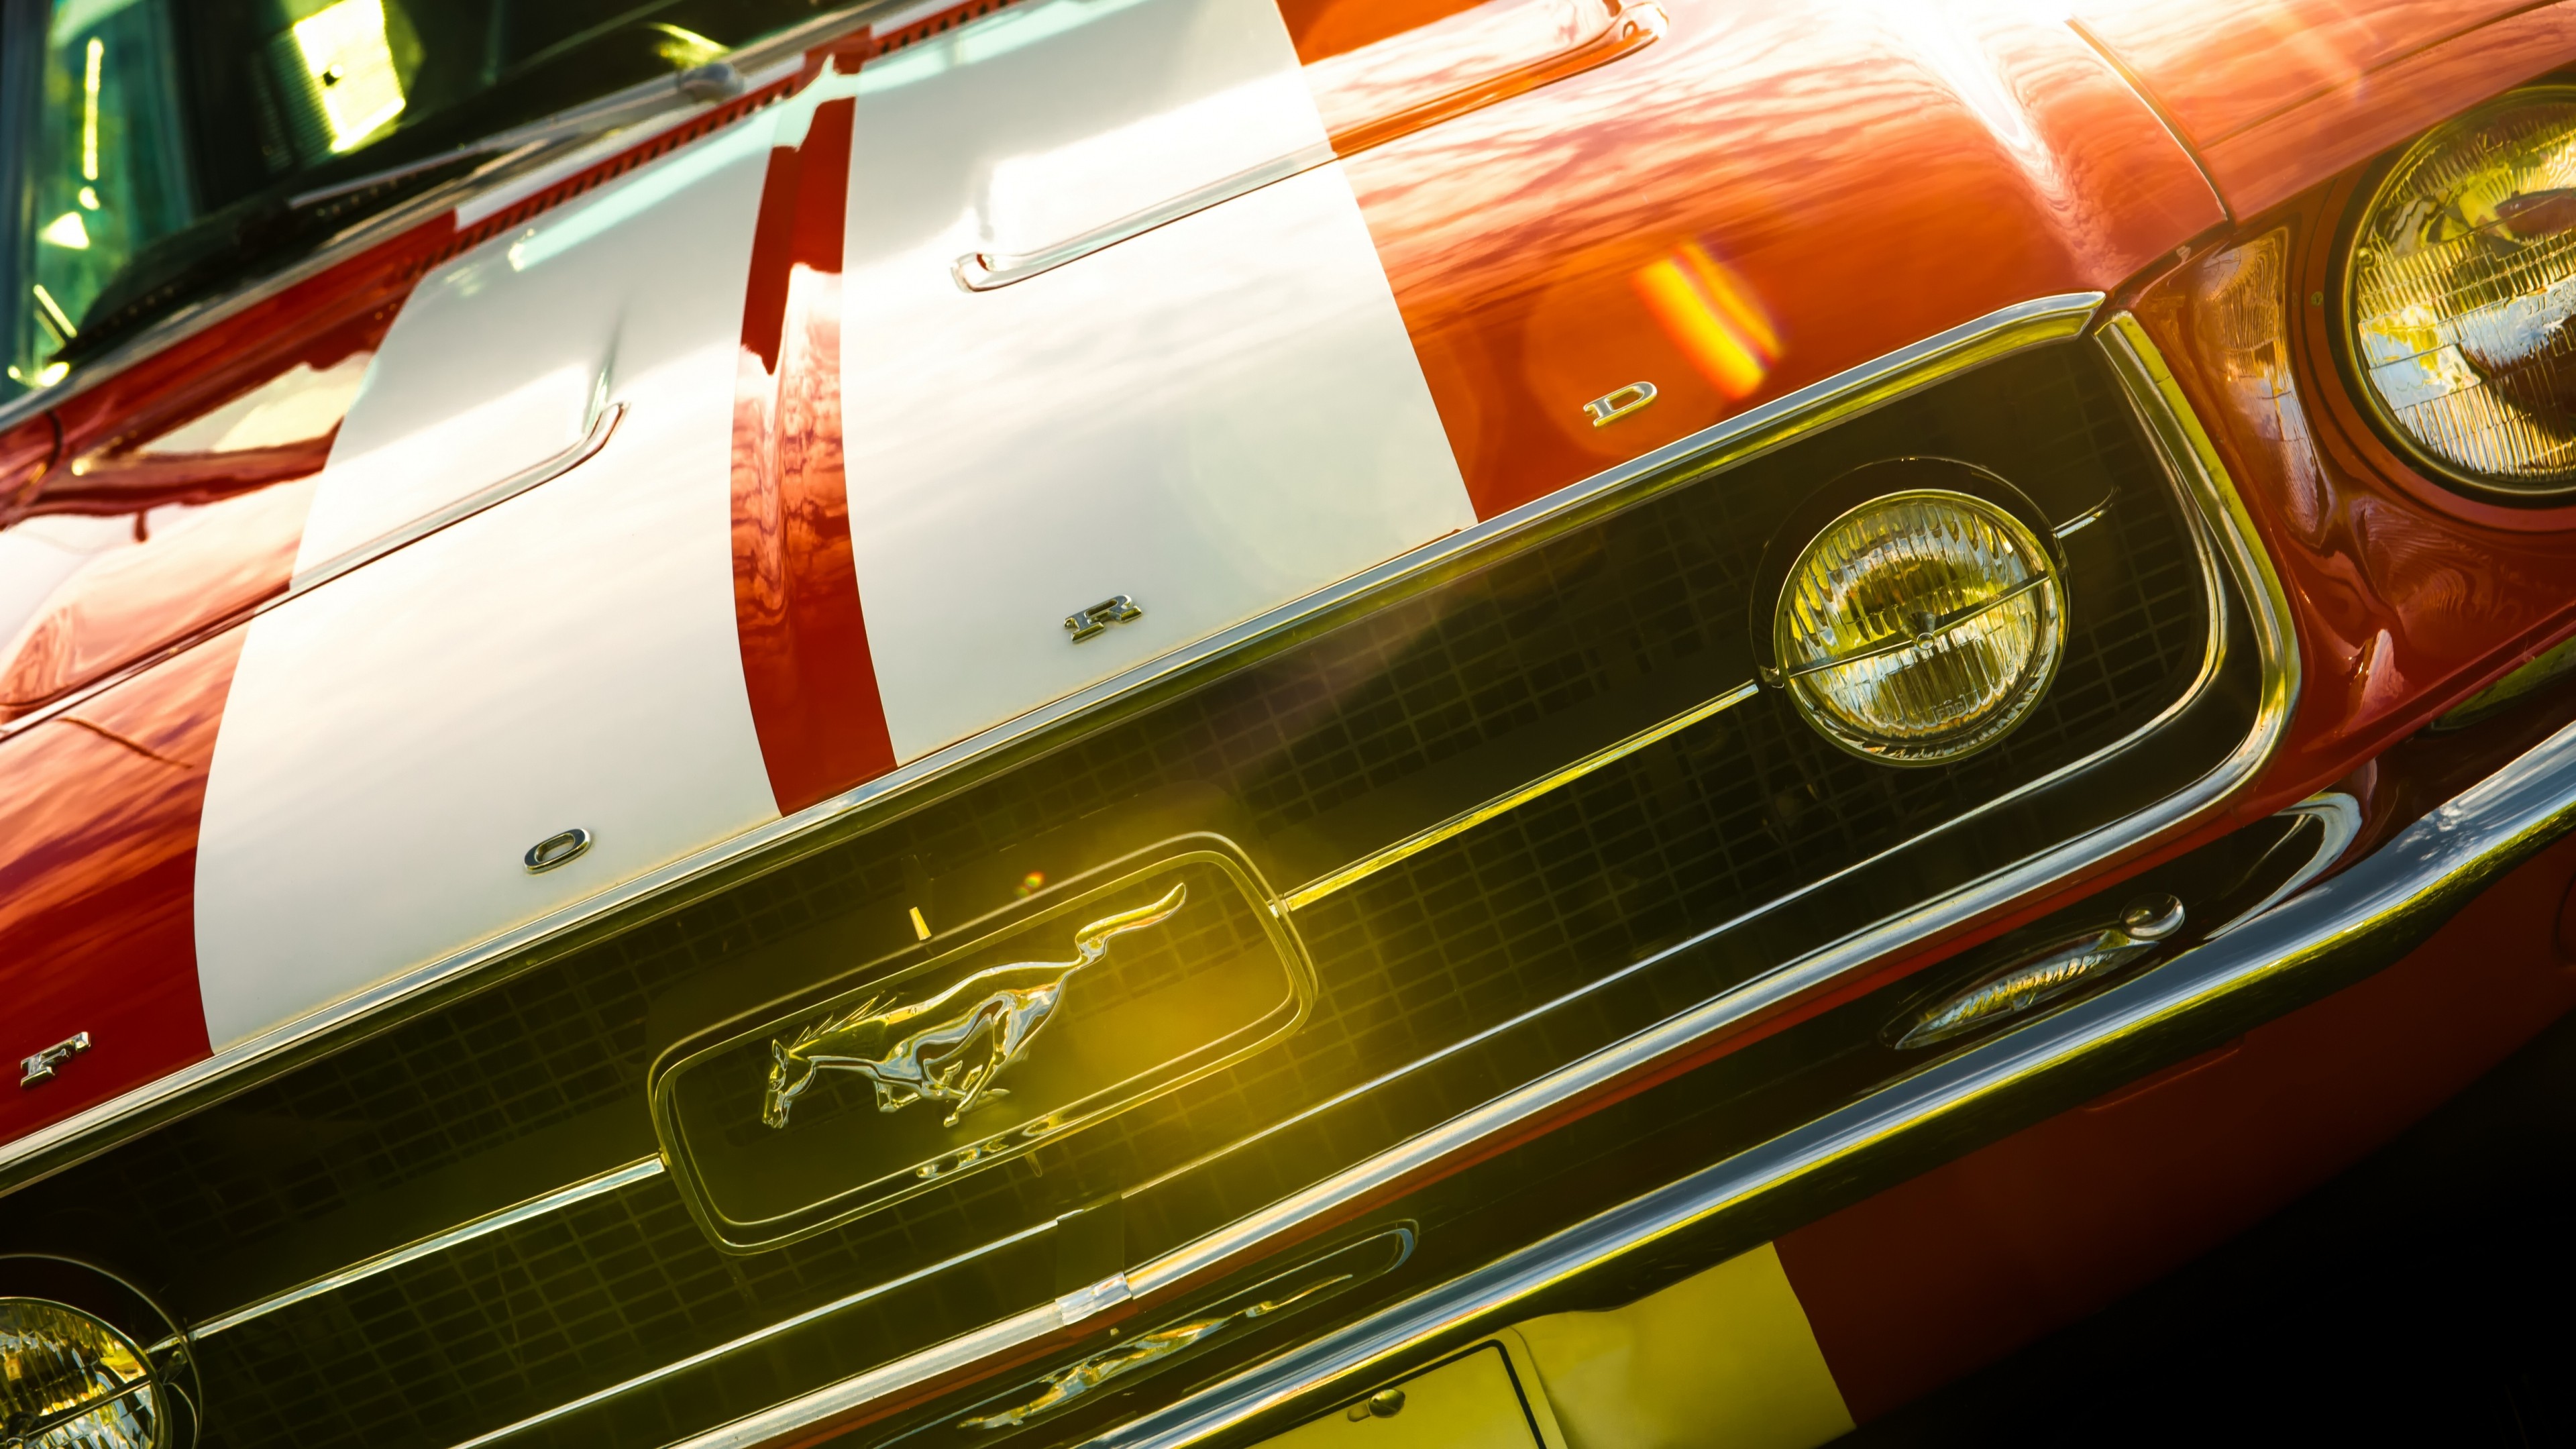 General 3840x2160 car Ford Mustang Ford red cars vehicle racing stripes muscle cars American cars